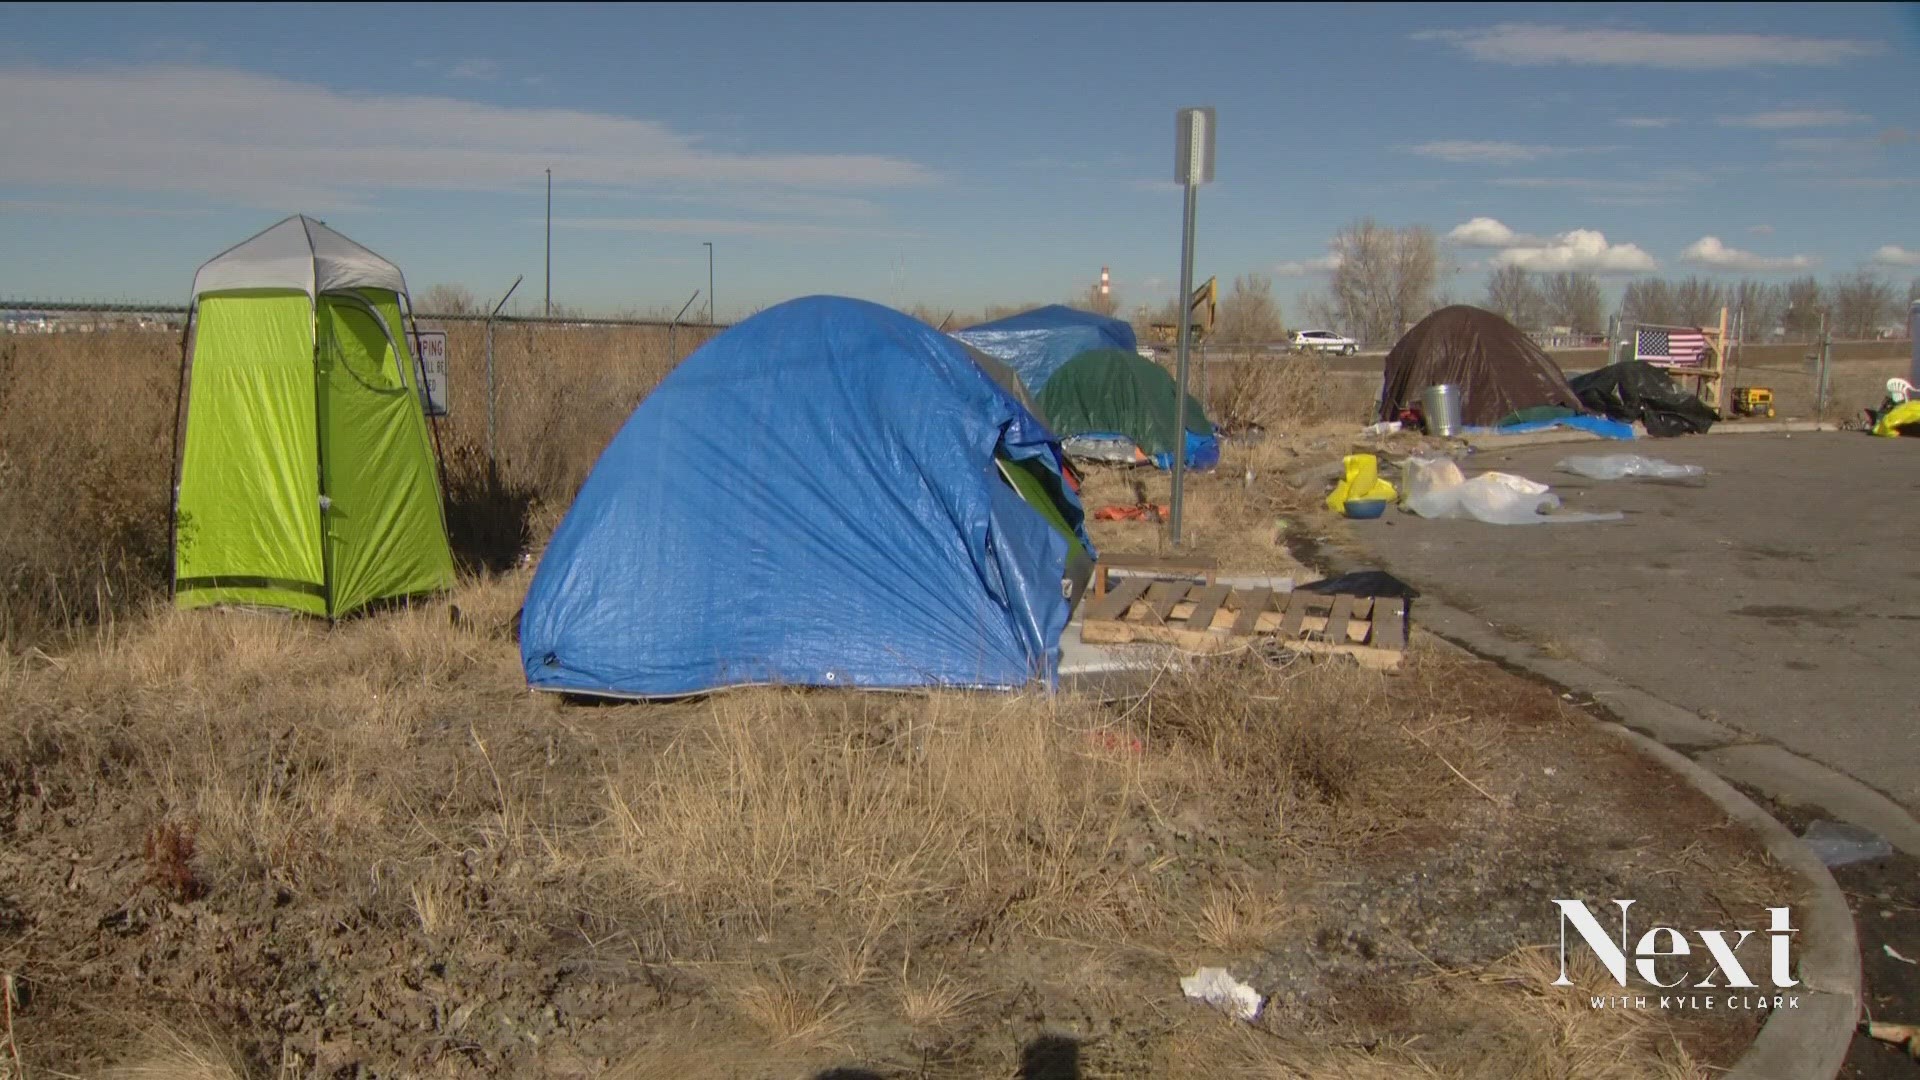 Denver used city-sanctioned camping sites for the homeless for years, but the city's been unwilling to create them for migrants living on the streets.